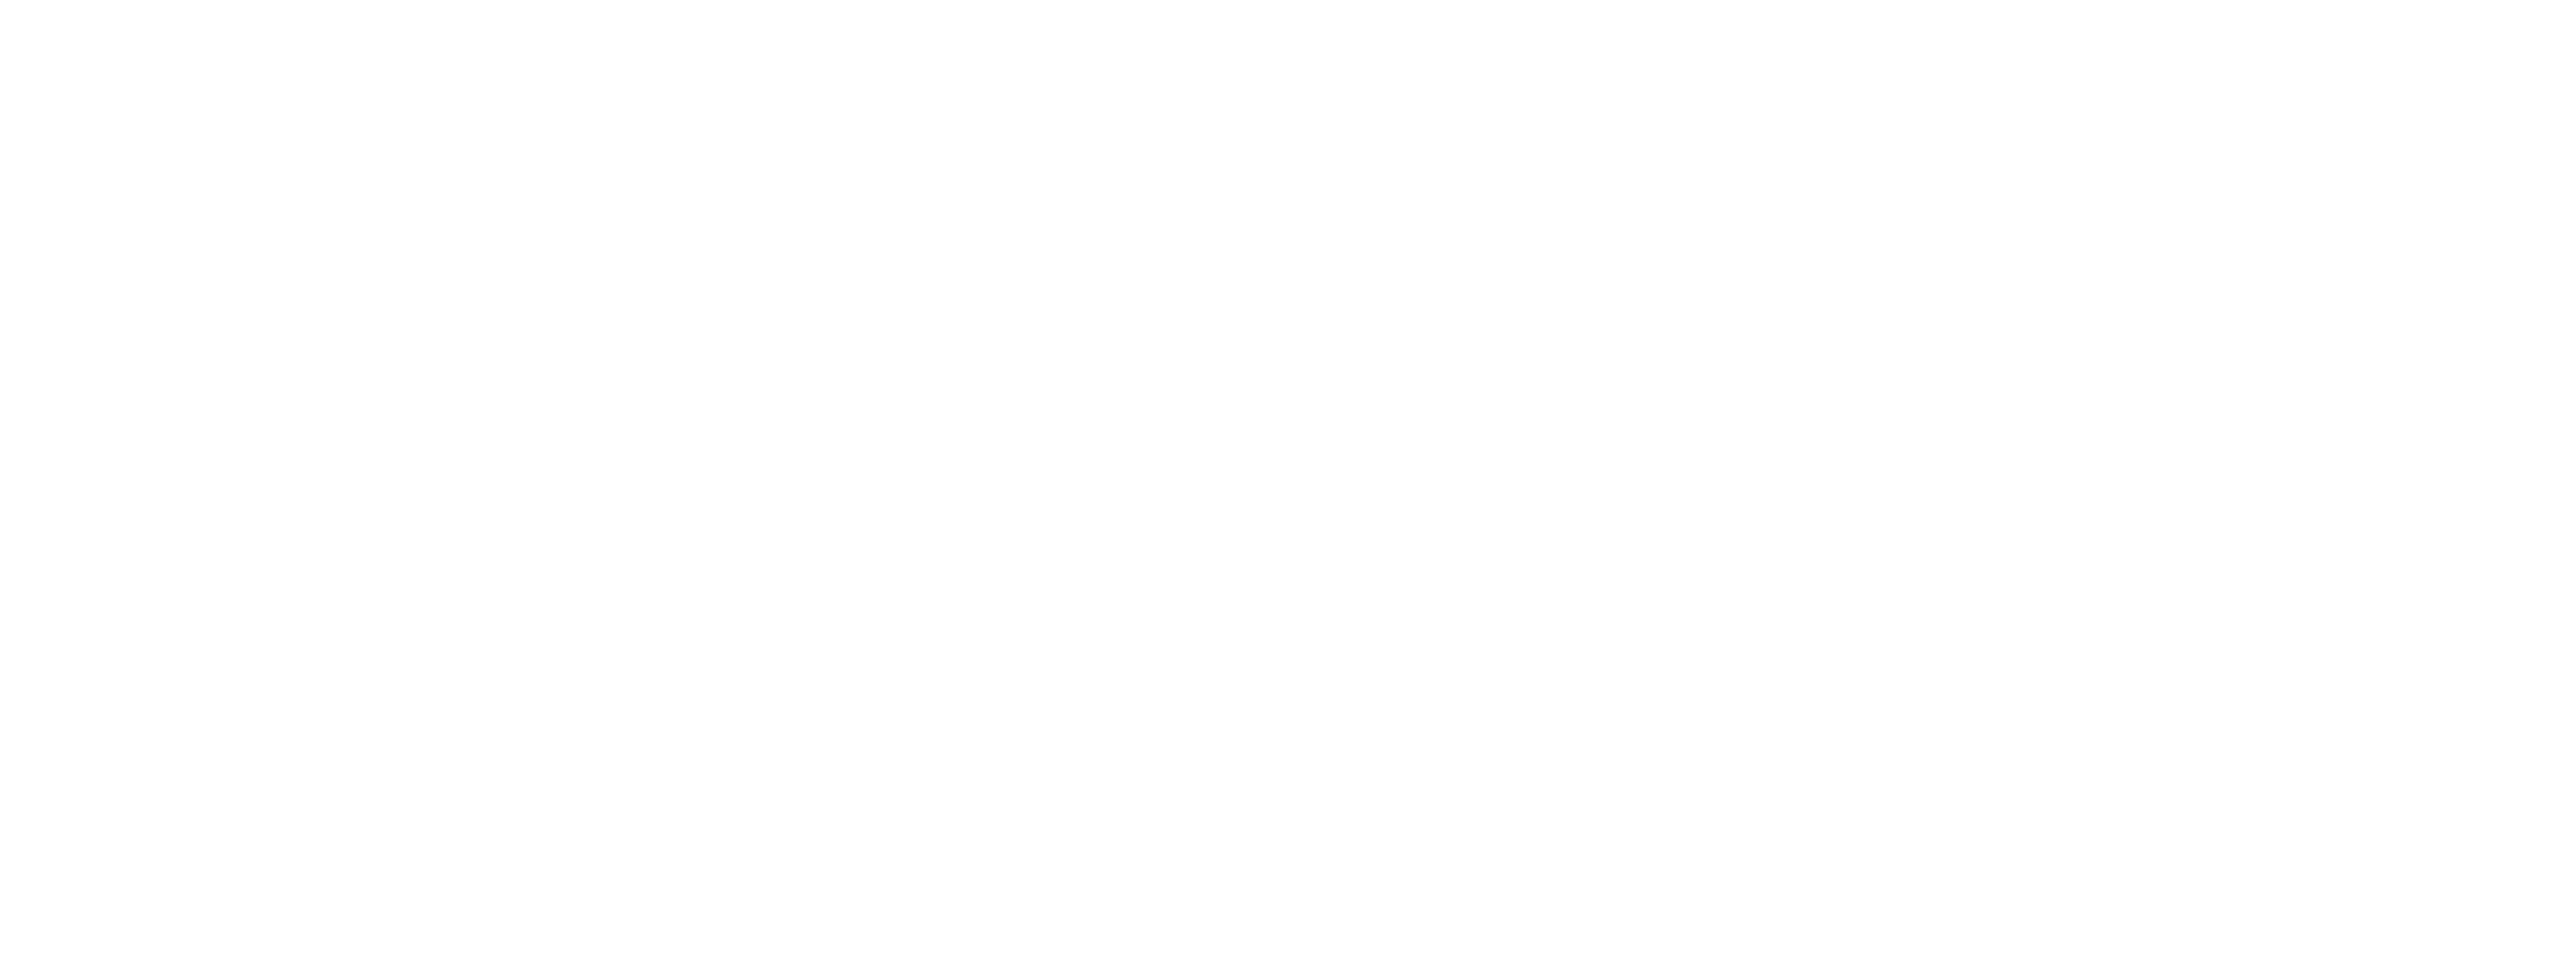 LXT one system